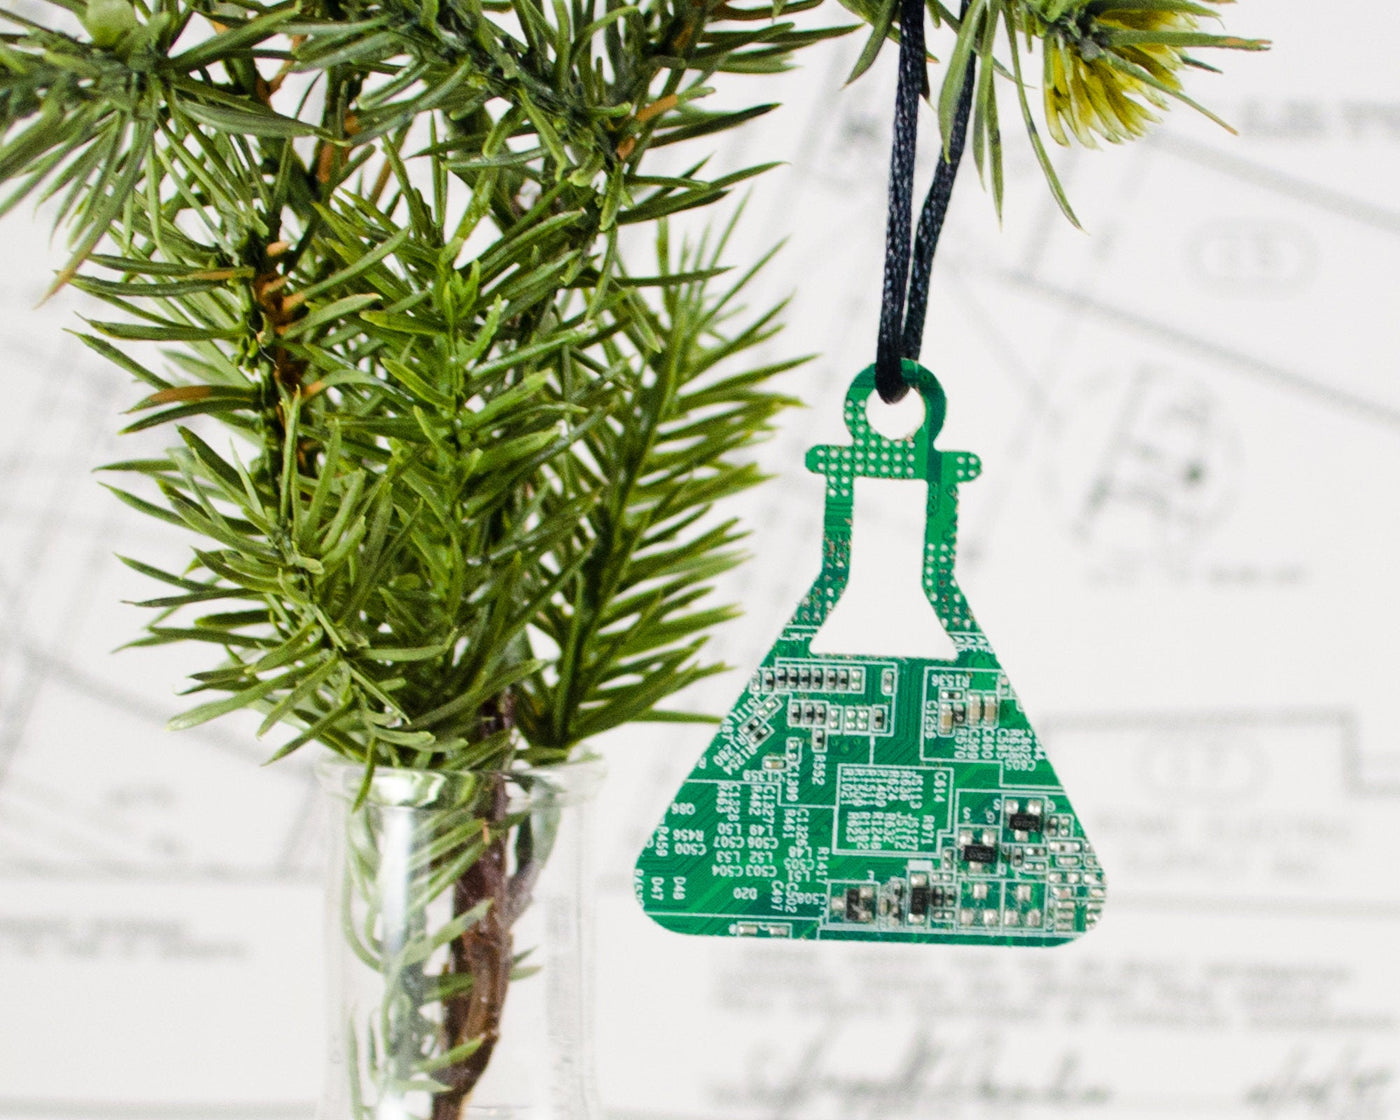 green circuit board upcycled into an Erlenmeyer flask ornament for chemists